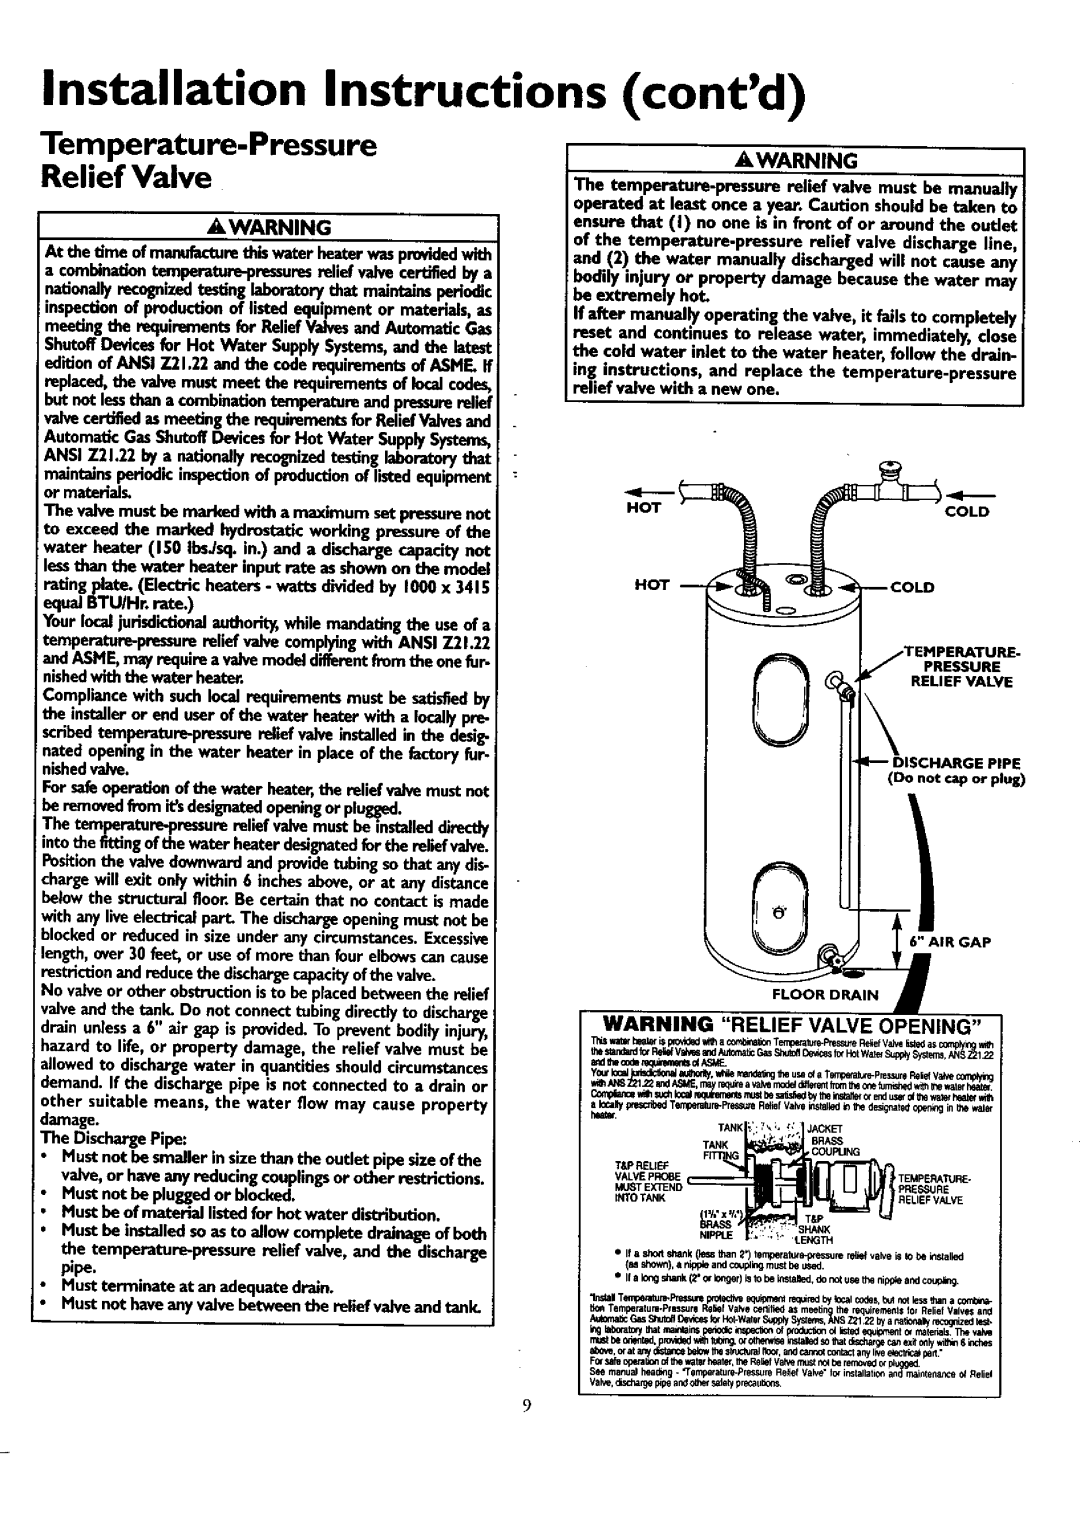 Kenmore 153.320490 HT 40 GAL owner manual Installation Instructions, contd, Temperature-Pressure Relief Valve, Awarning 